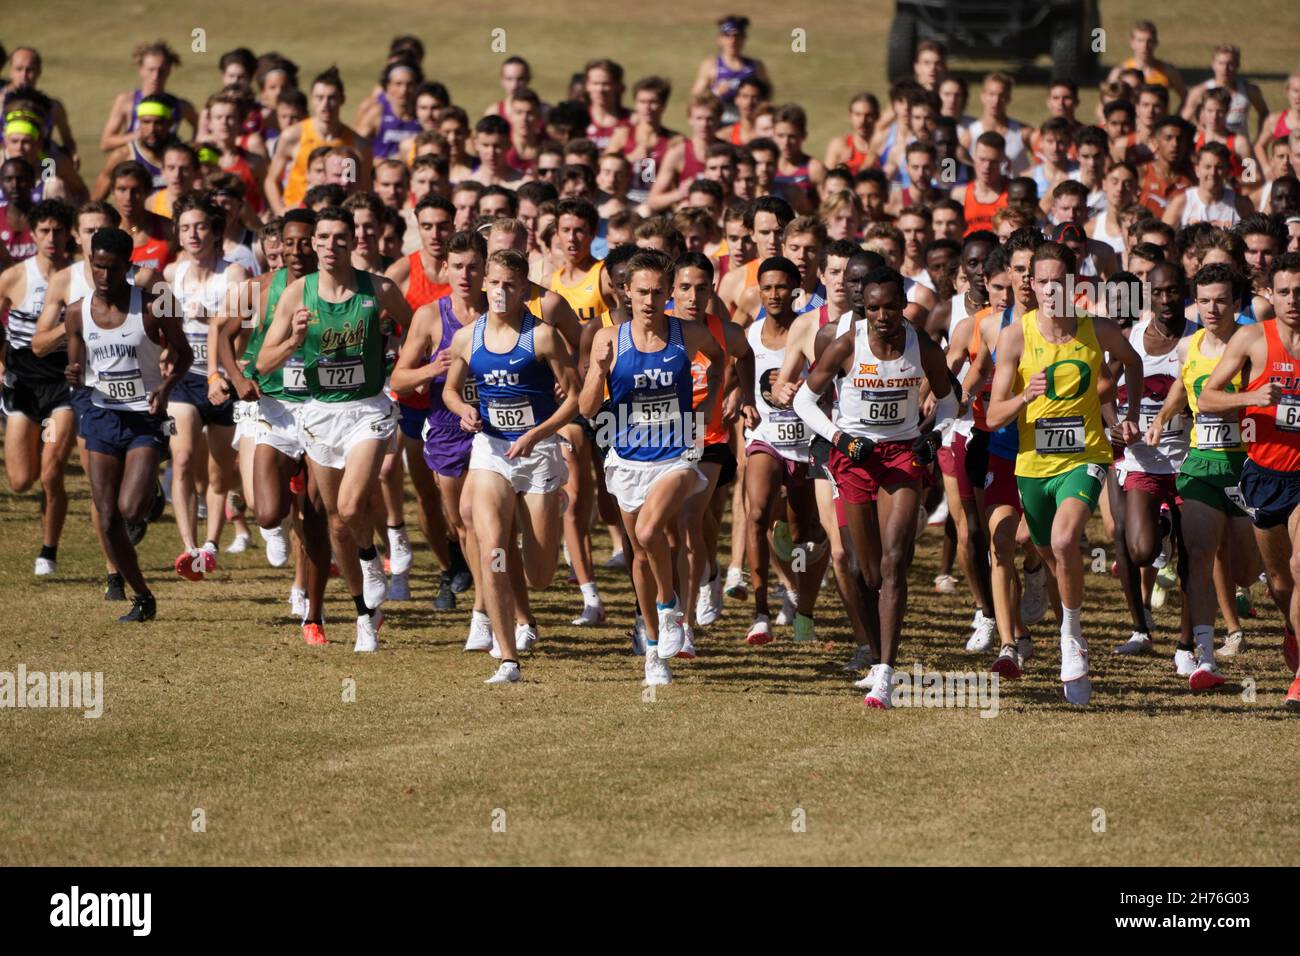 The lead pack in the men's race, Dylan Jacobs of Notre Dame (727), Creed Thompson (562) and Conner Mantz (560) of BYU, Wesley Kiptoo of Iowa State (64 Stock Photo